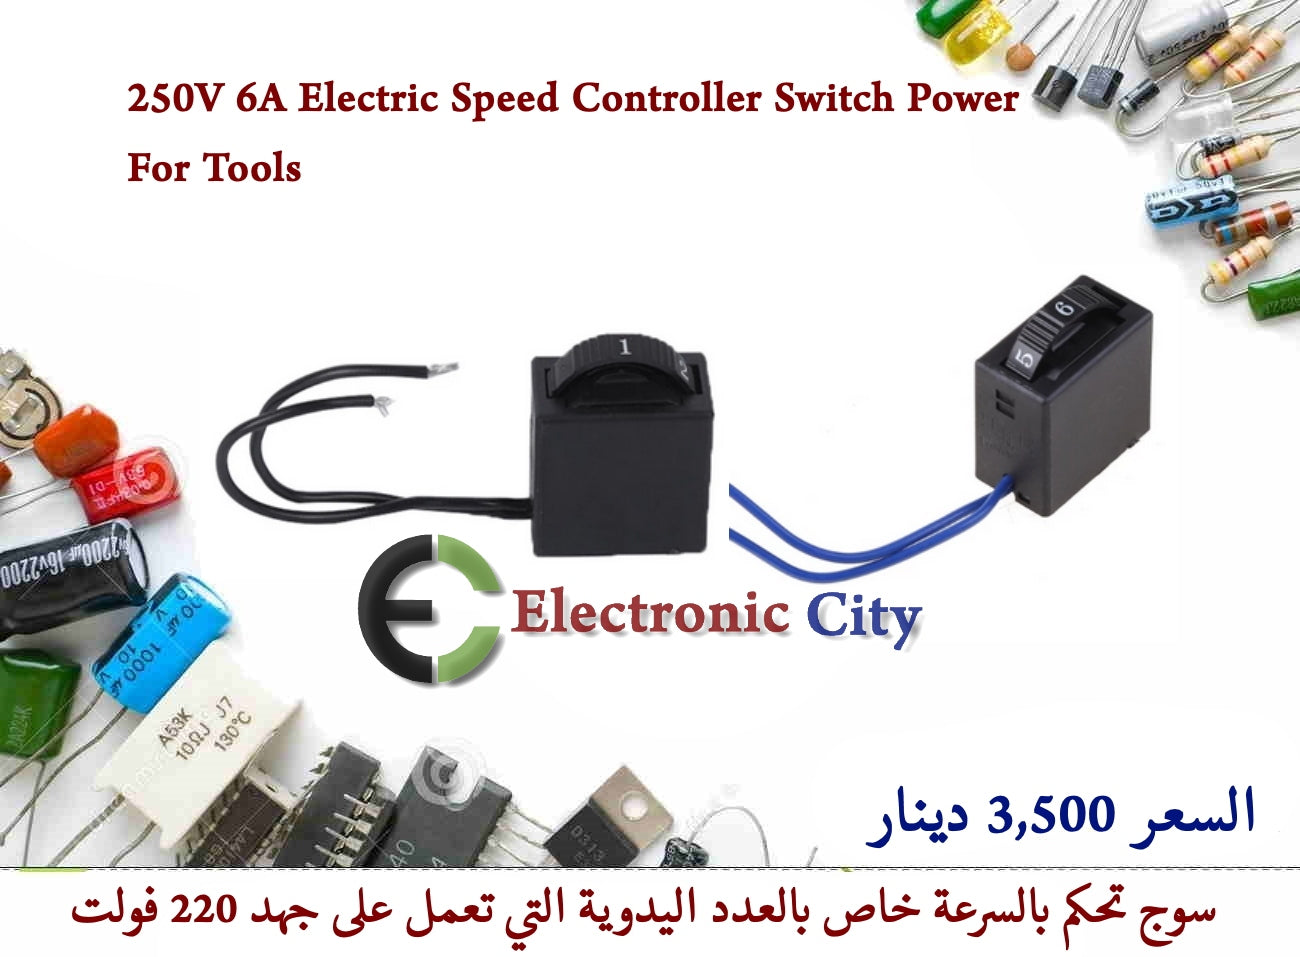 250V 6A Electric Speed Controller Switch Power For Tools